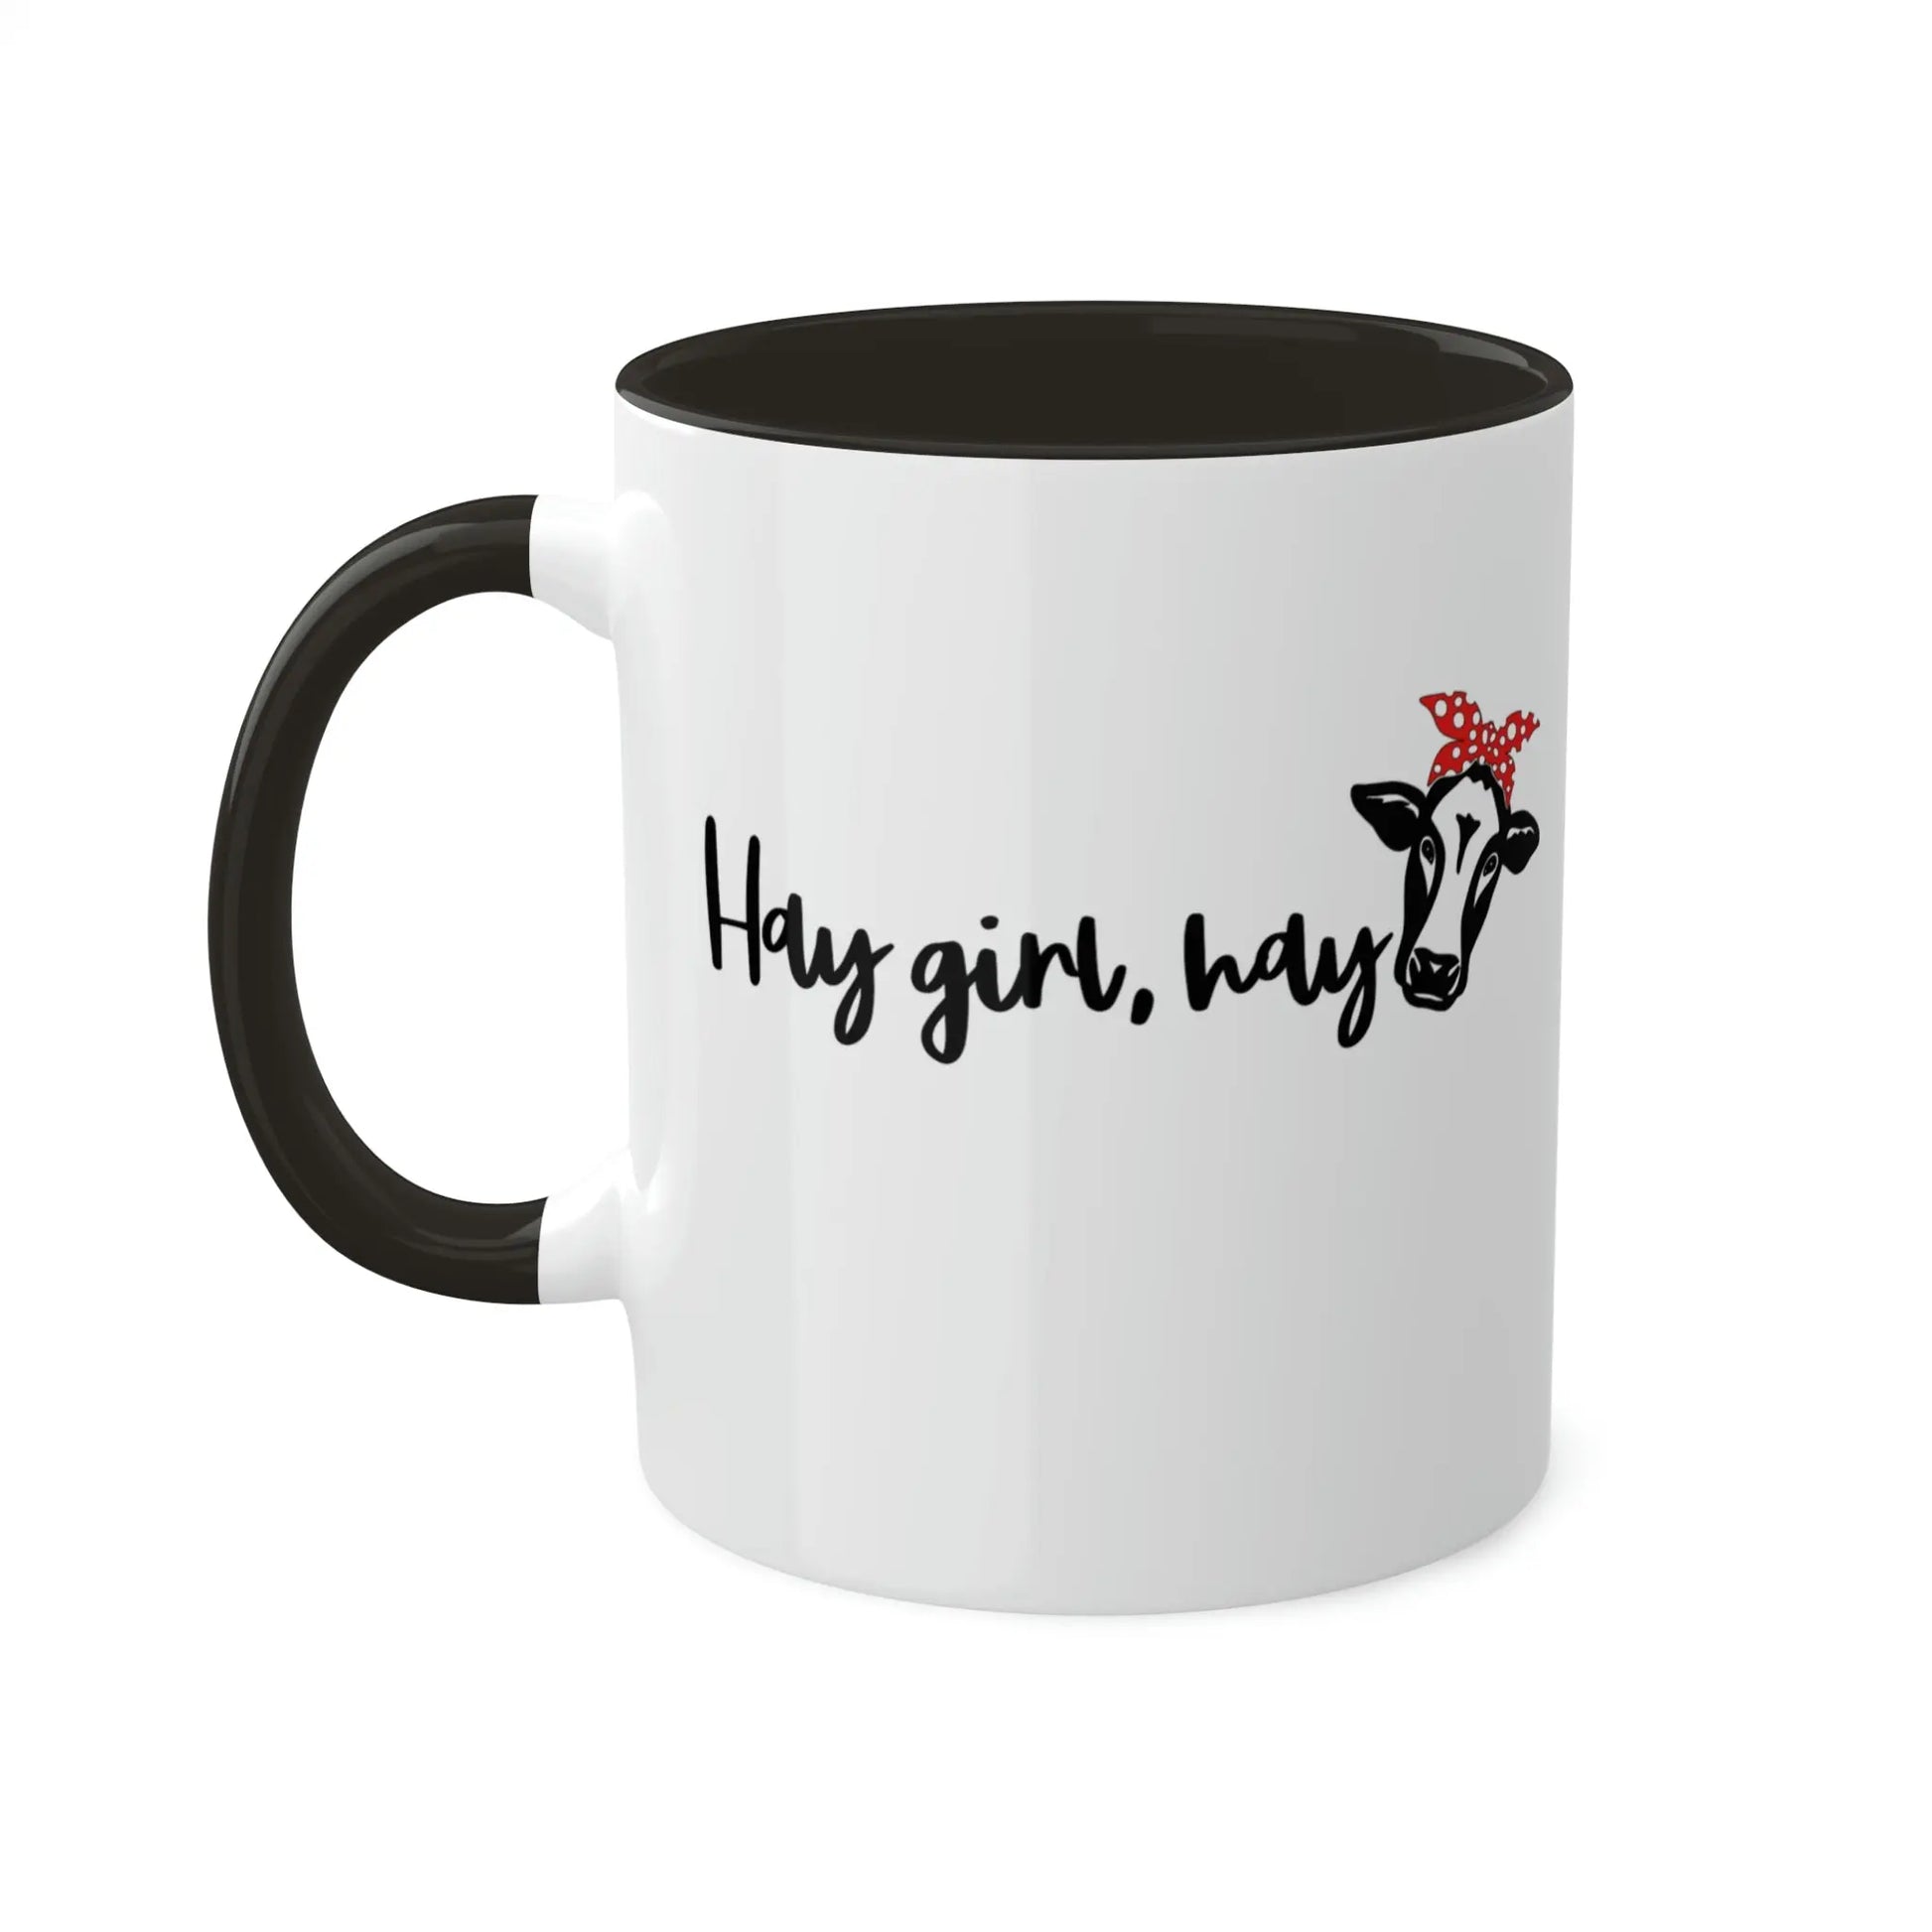 hay-girl-hay-mug-with-black-accent-11-oz-right-side